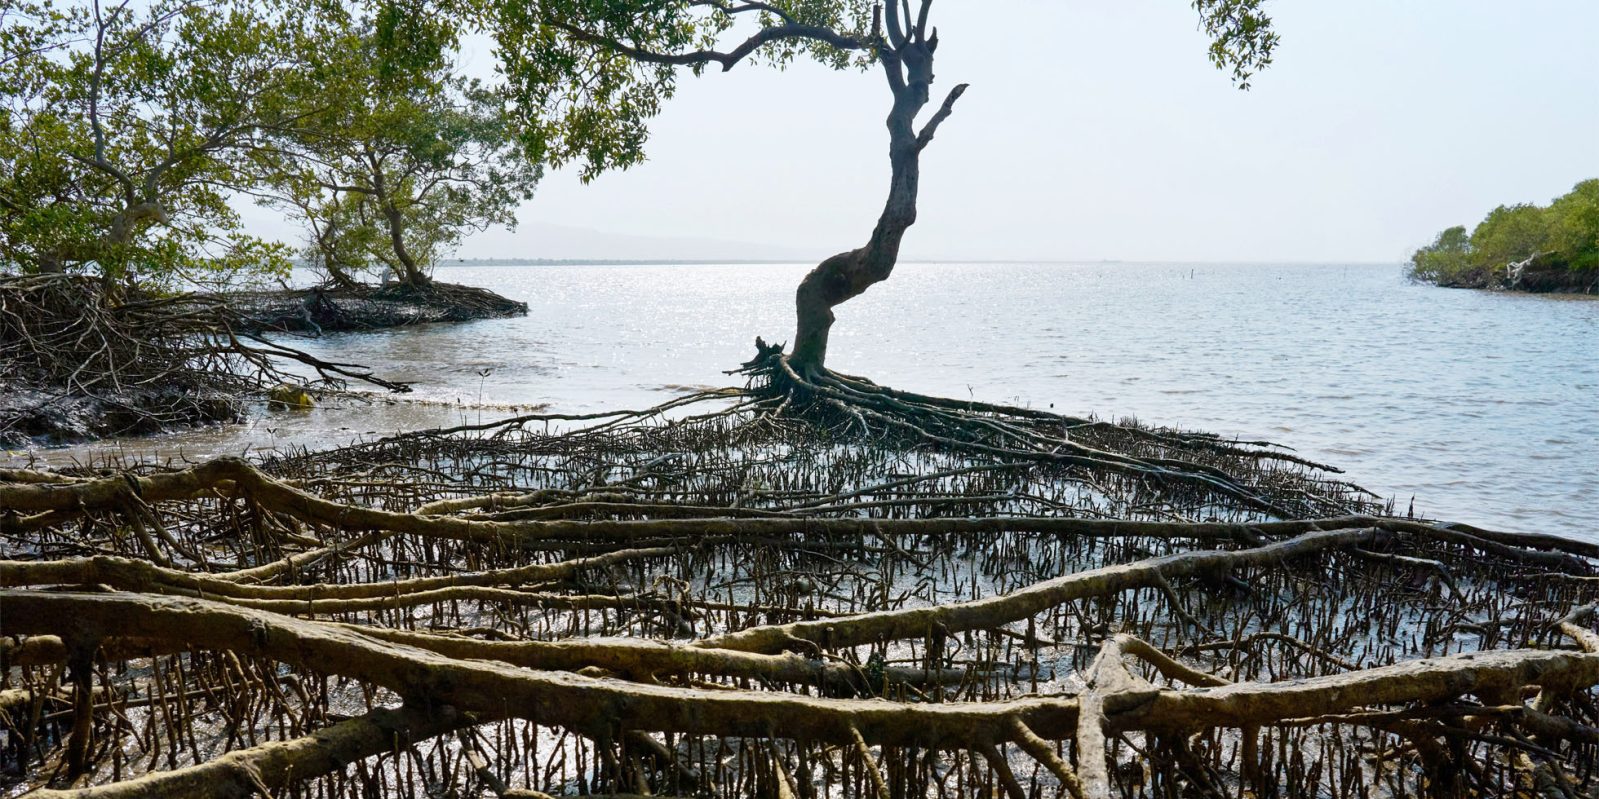 Mangrove tree at the sea edge with extensive roots in the water | Apple mangrove preservation project near Mumbai